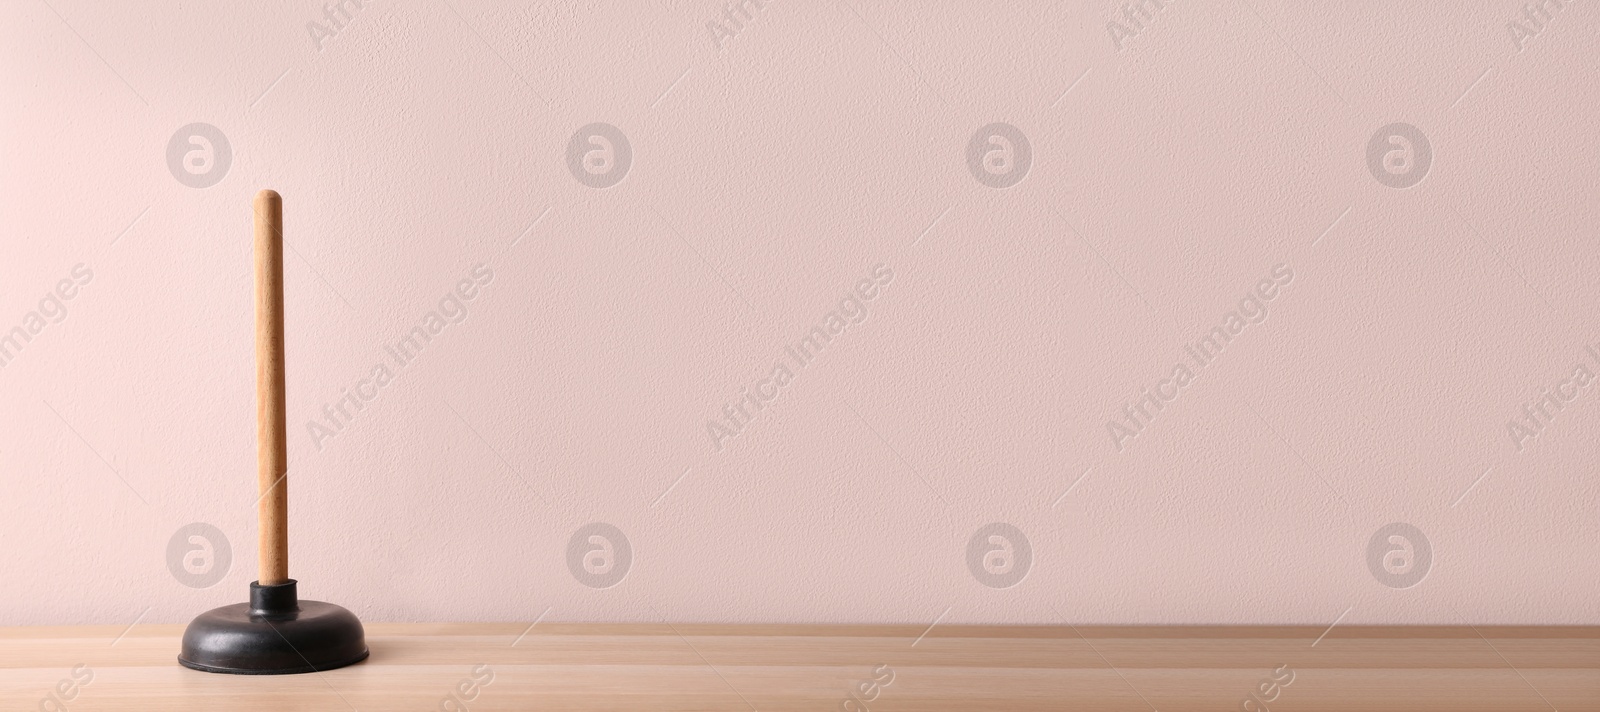 Photo of Plunger on wooden table against pink background. Space for text